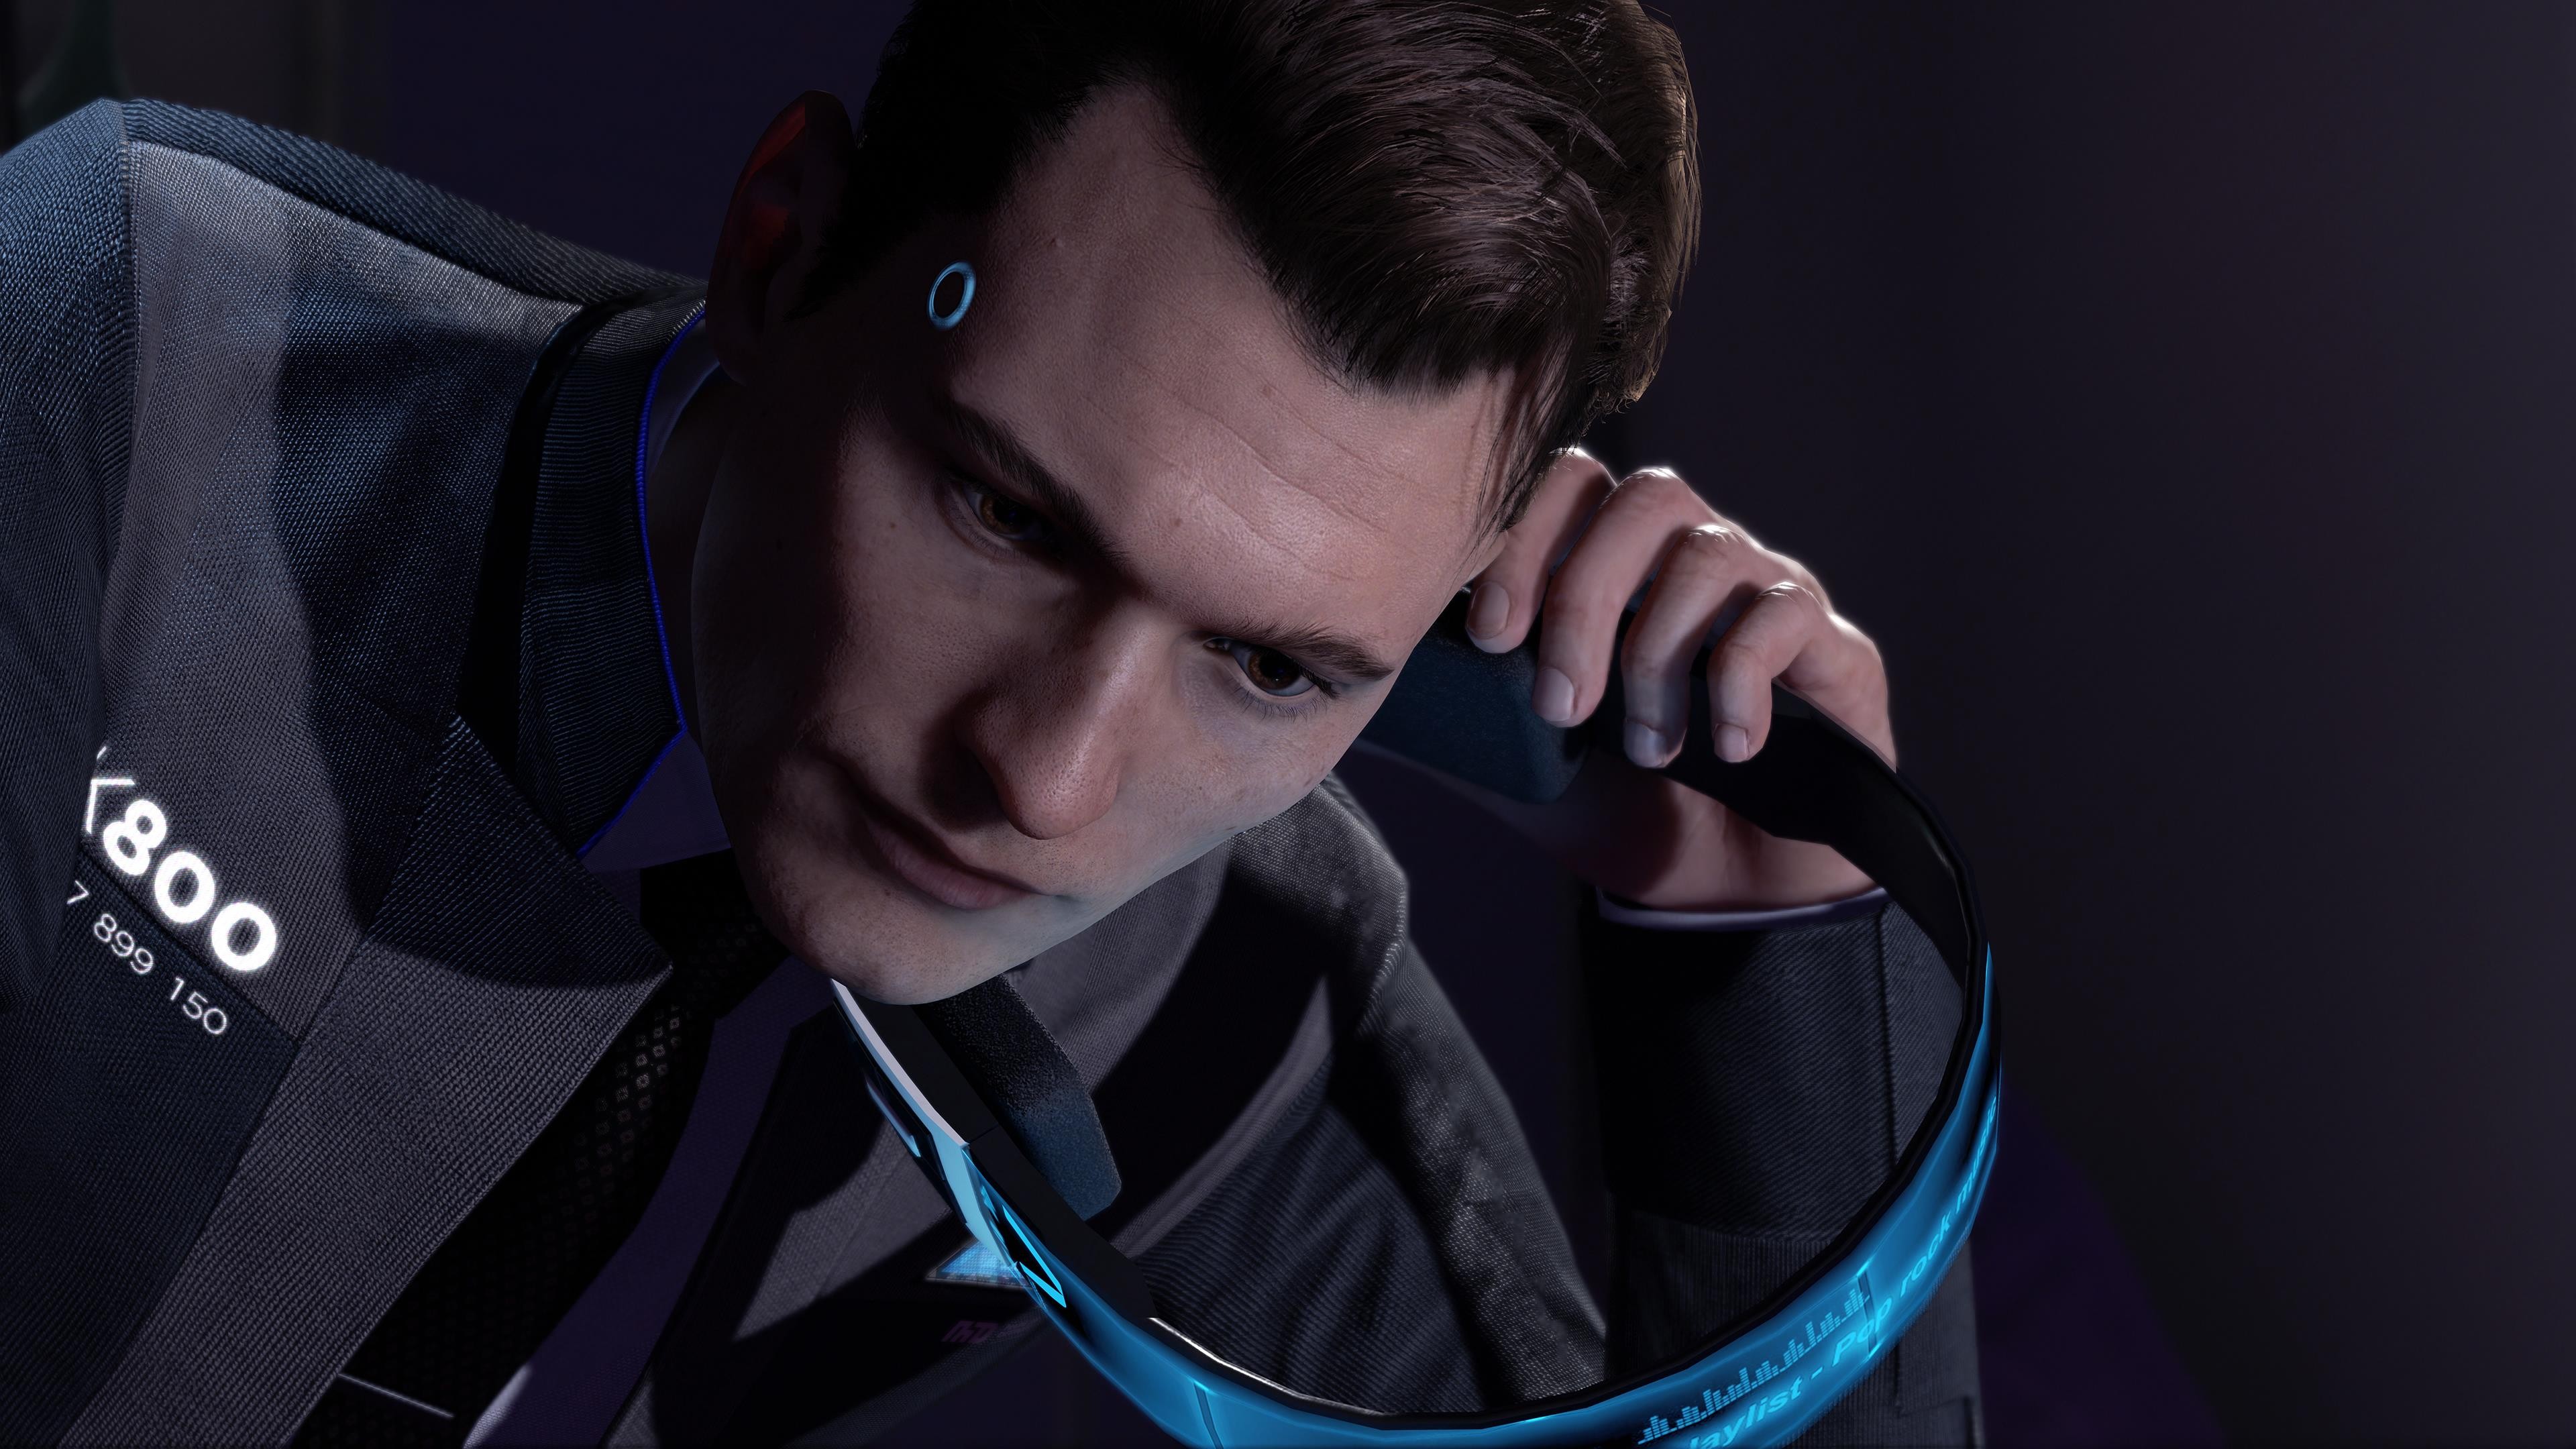 detroit become human pc download online